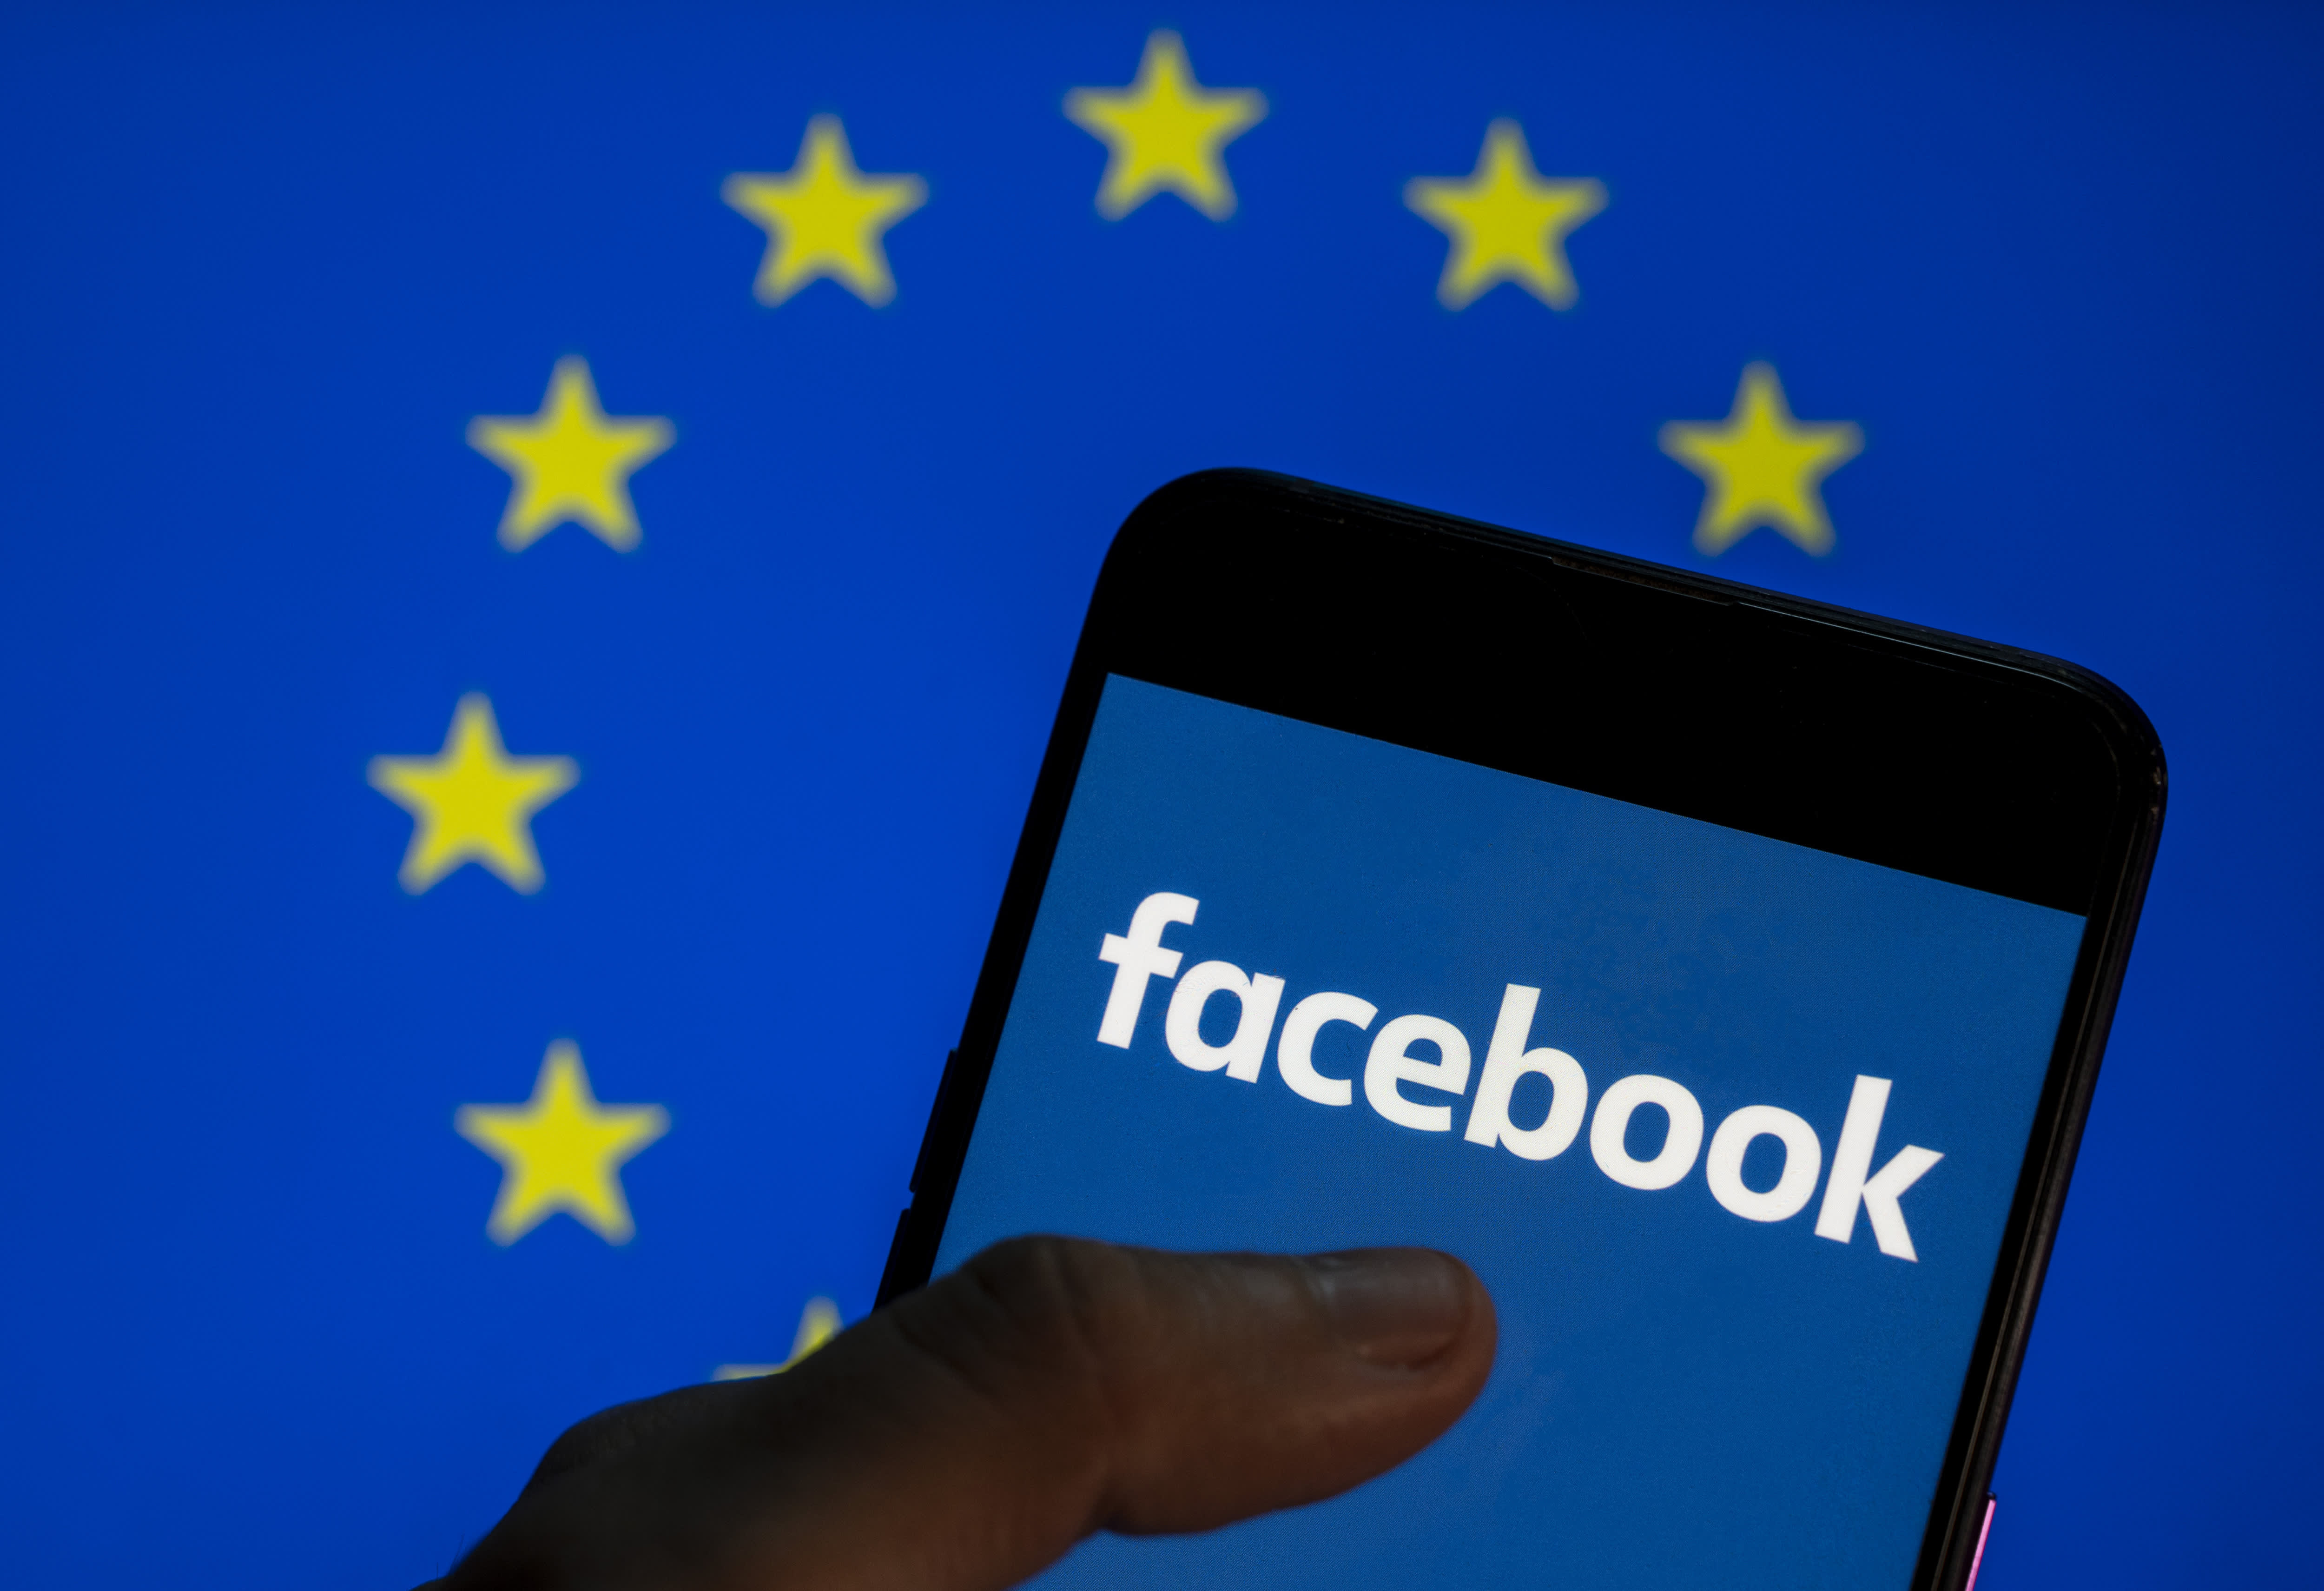 Facebook plans to hire 10,000 people in the EU to build its vision for a 'metaverse'